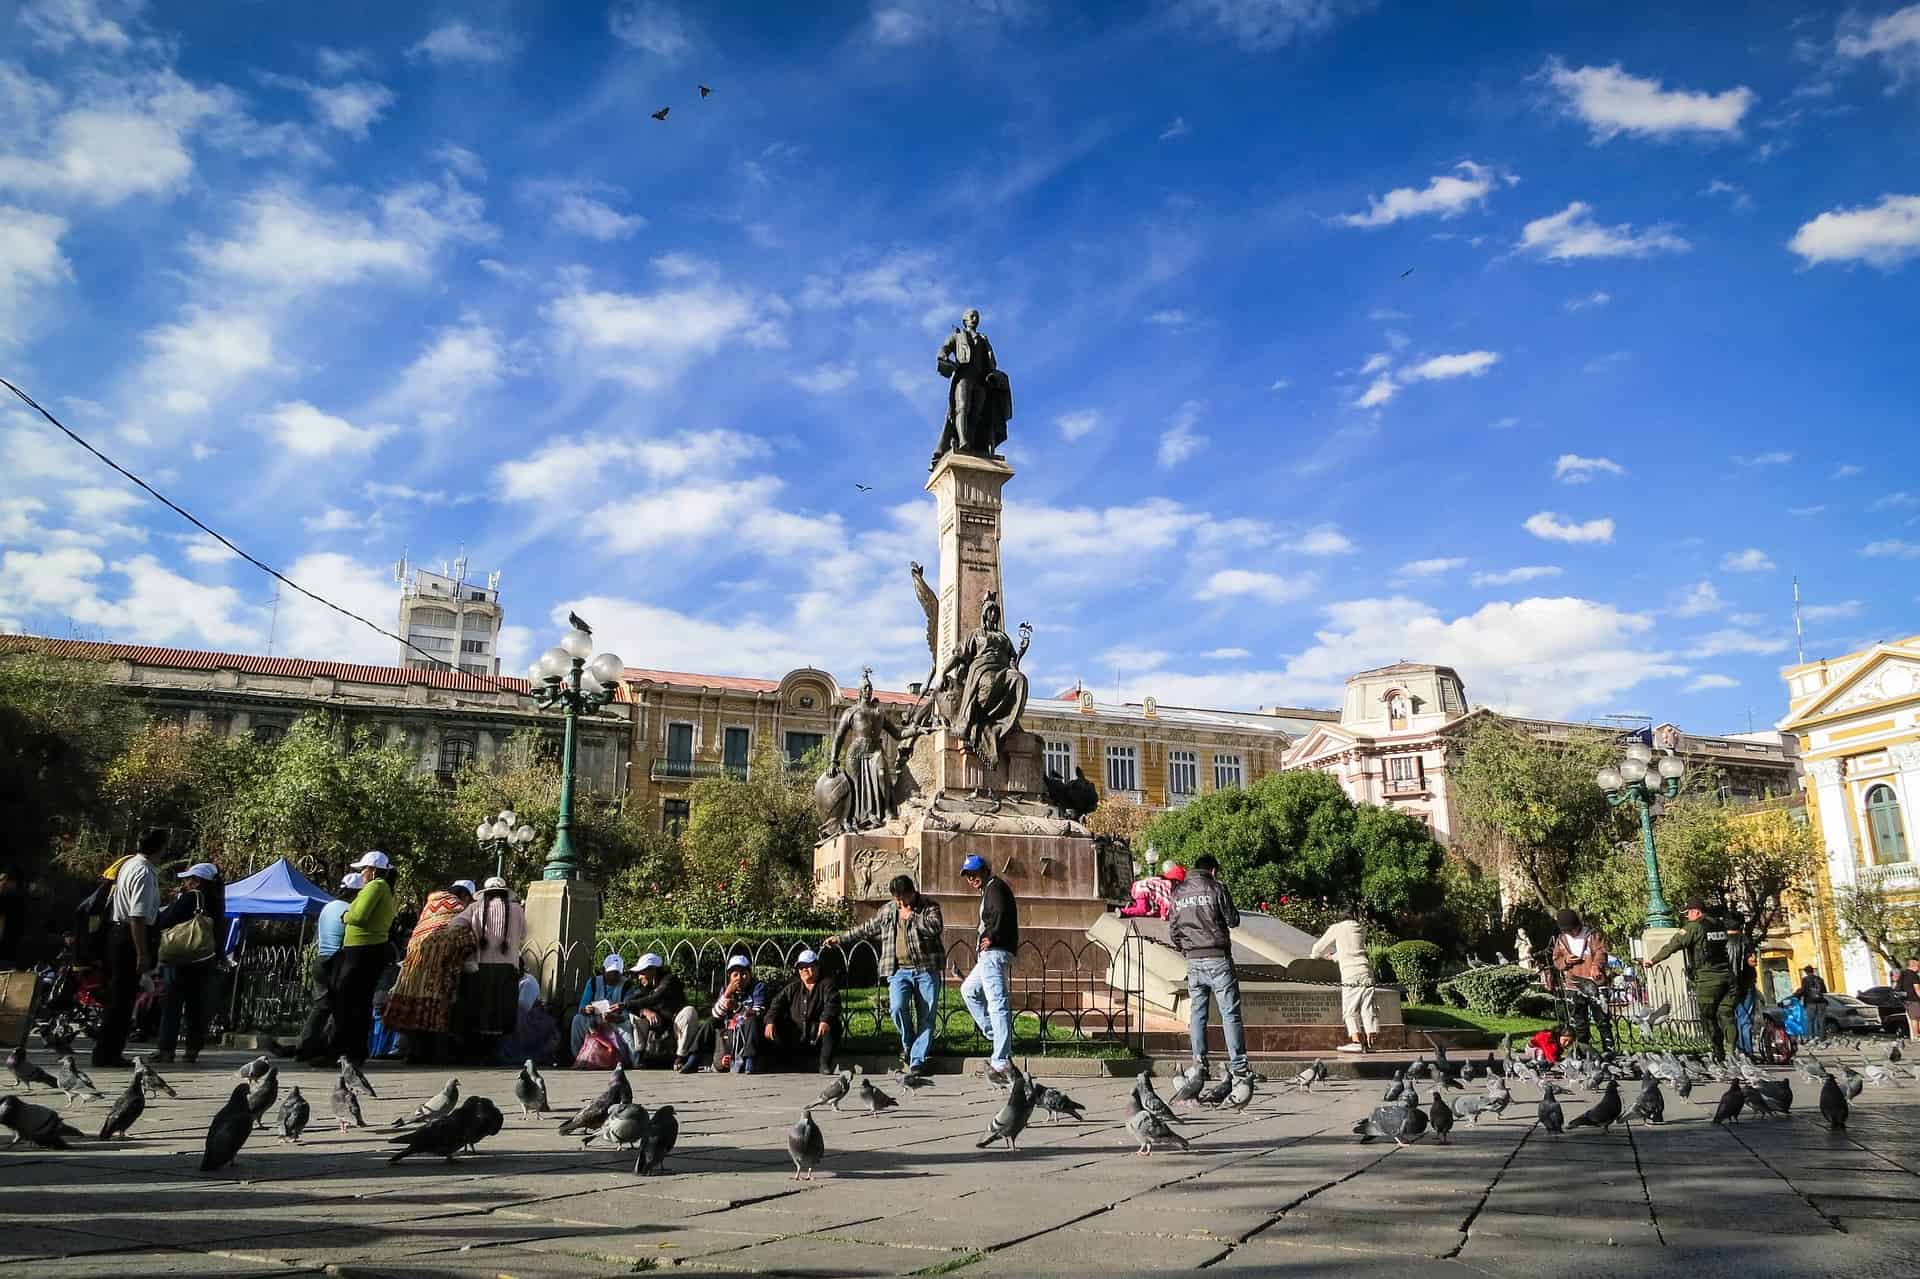 Best things to do in La Paz Bolivia - David Karamanis - Plaza Murillo by Stocksnap on Pixabay